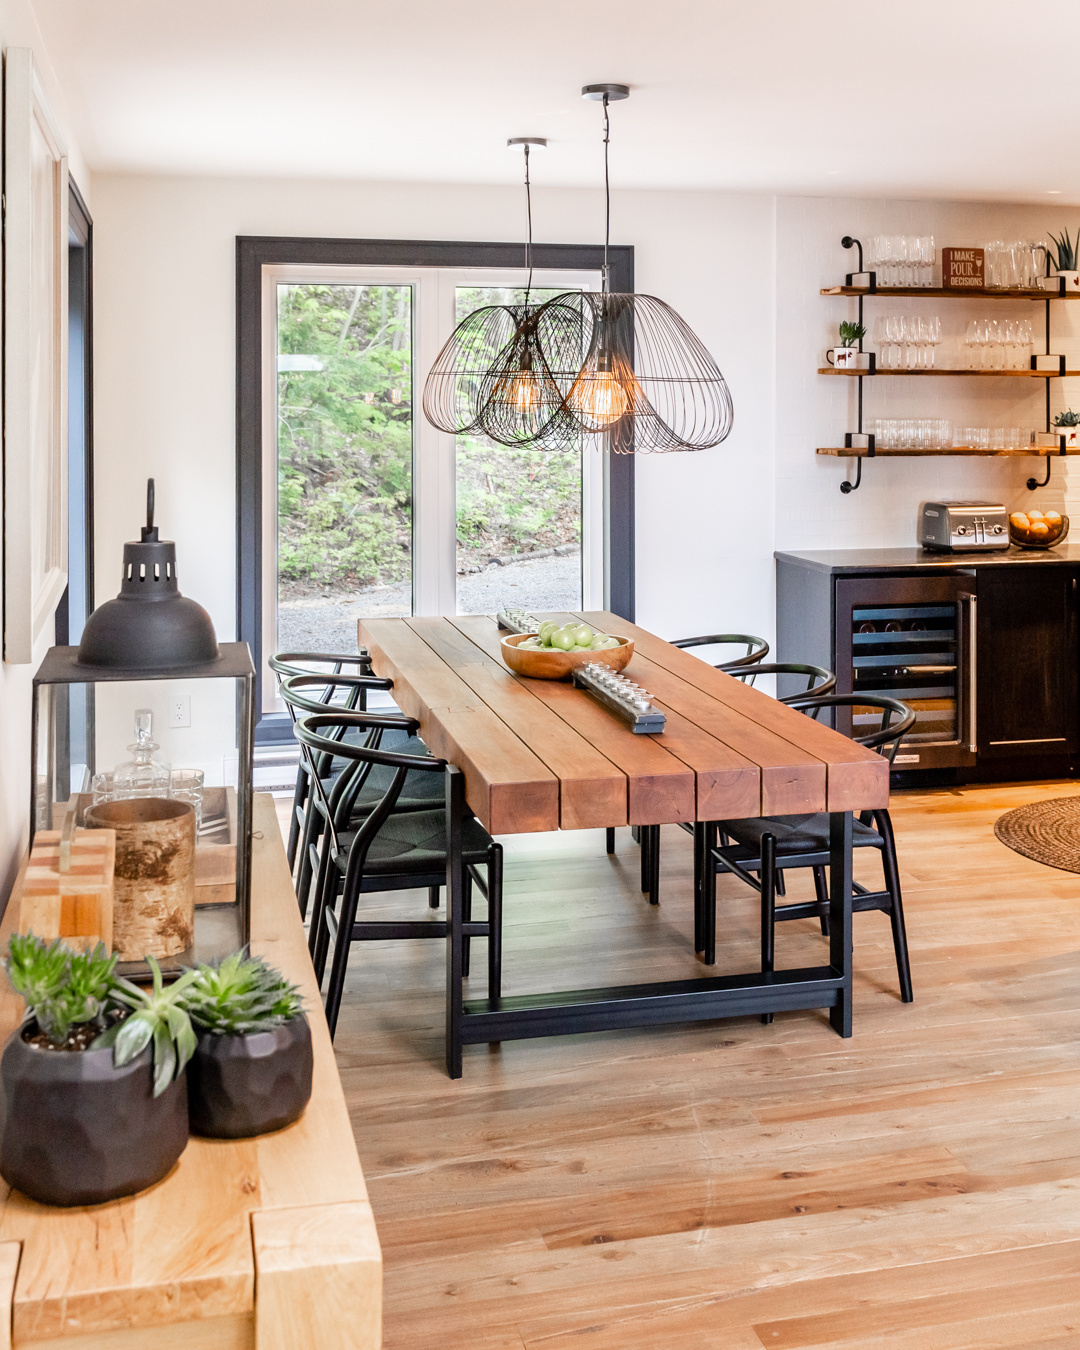 wood topped dining table with black legs and chairs, black wire pendant lights, kitchen with hanging shelves to the right